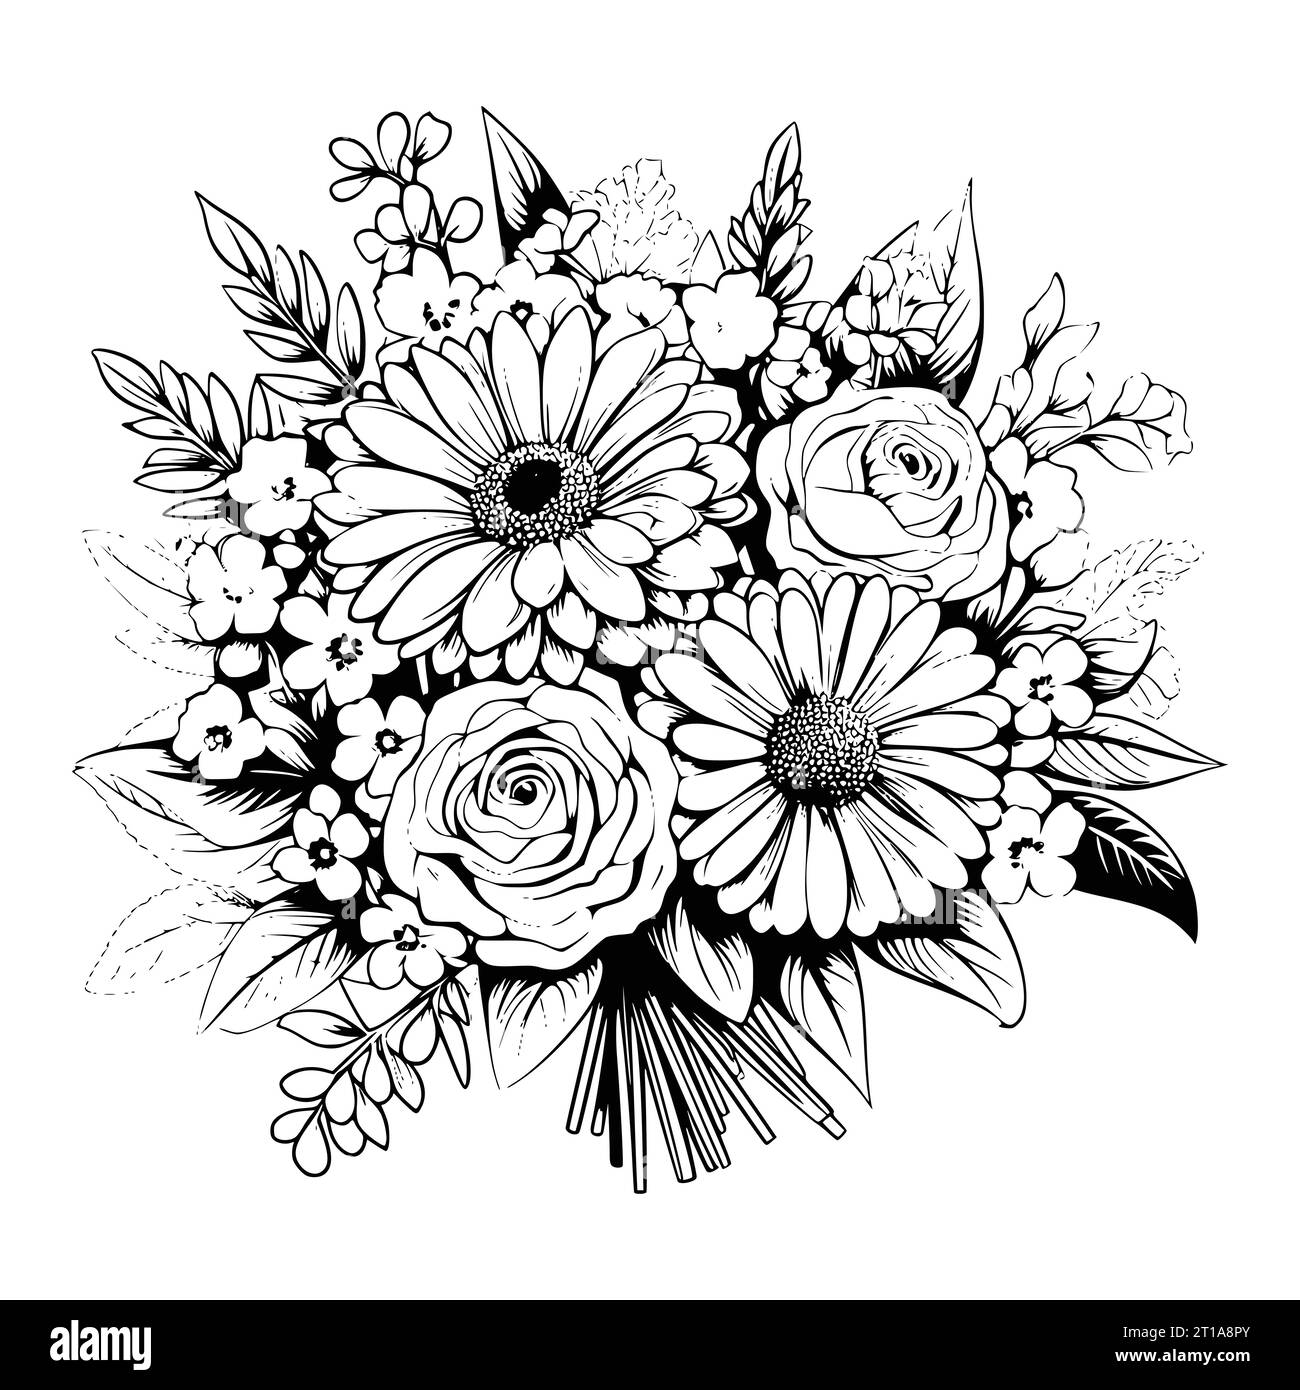 Bouquet Flowers Coloring Page for Kids Stock Vector